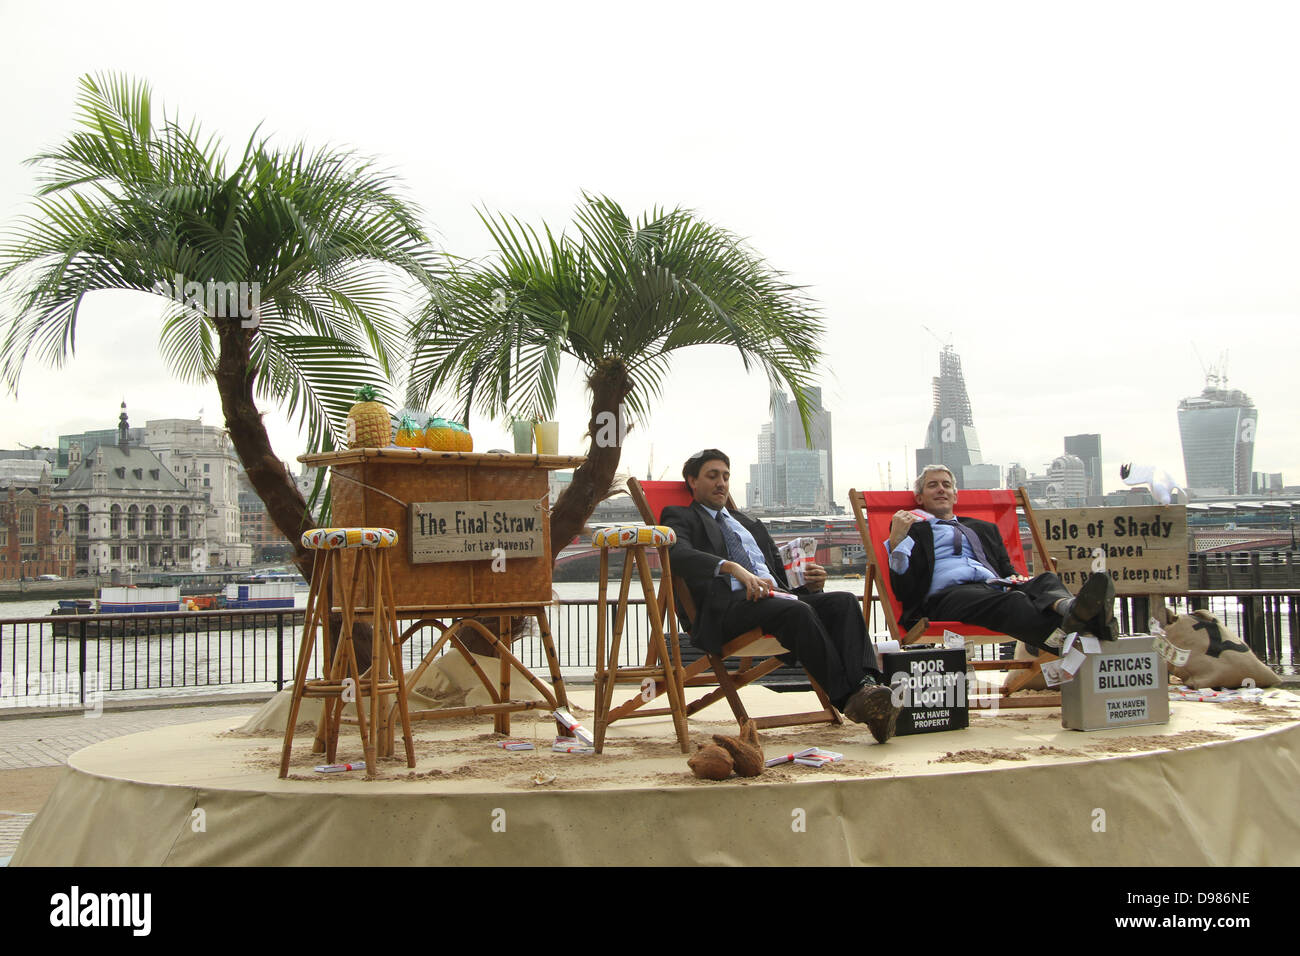 London 14 June 2013. The Isle of Shady, a pop-up tax haven on London’s South Bank, was set up by ‘Enough Food IF’ campaigners calling for tax justice as world leaders prepare to meet for the Open for Growth and G8 summit.Credit David Mbiyu/Alamy Live News Stock Photo